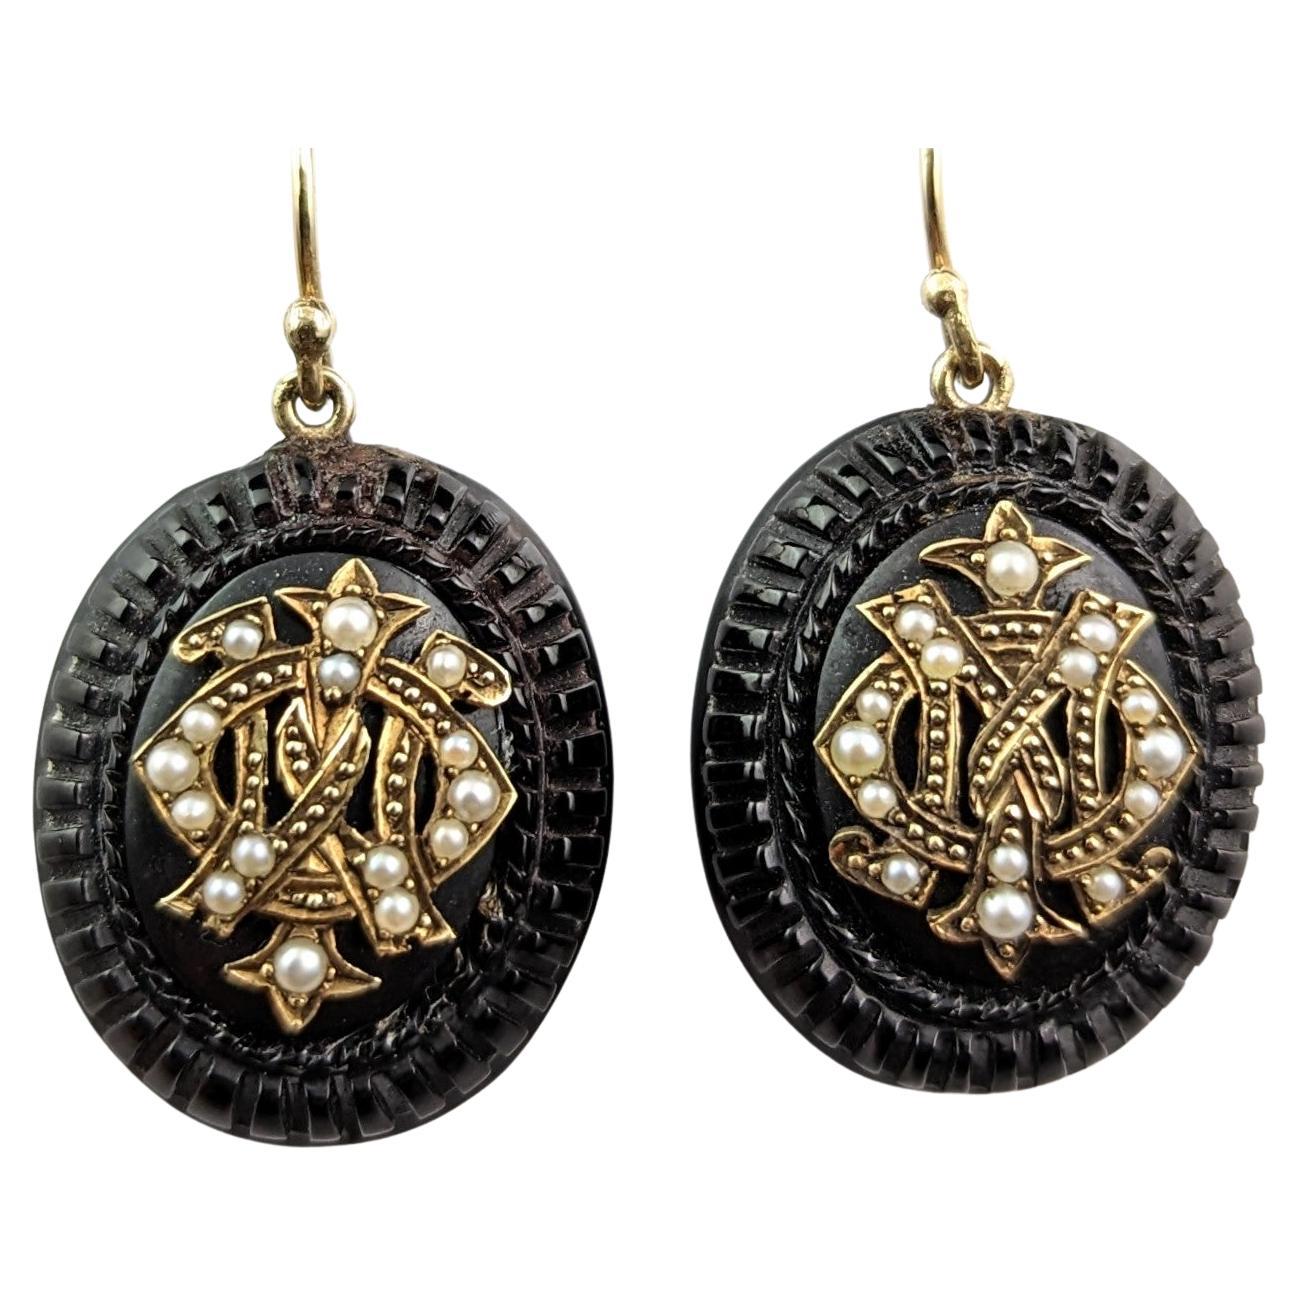 Antique Whitby Jet Mourning Earrings, 9k Gold and Seed Pearl, IMO